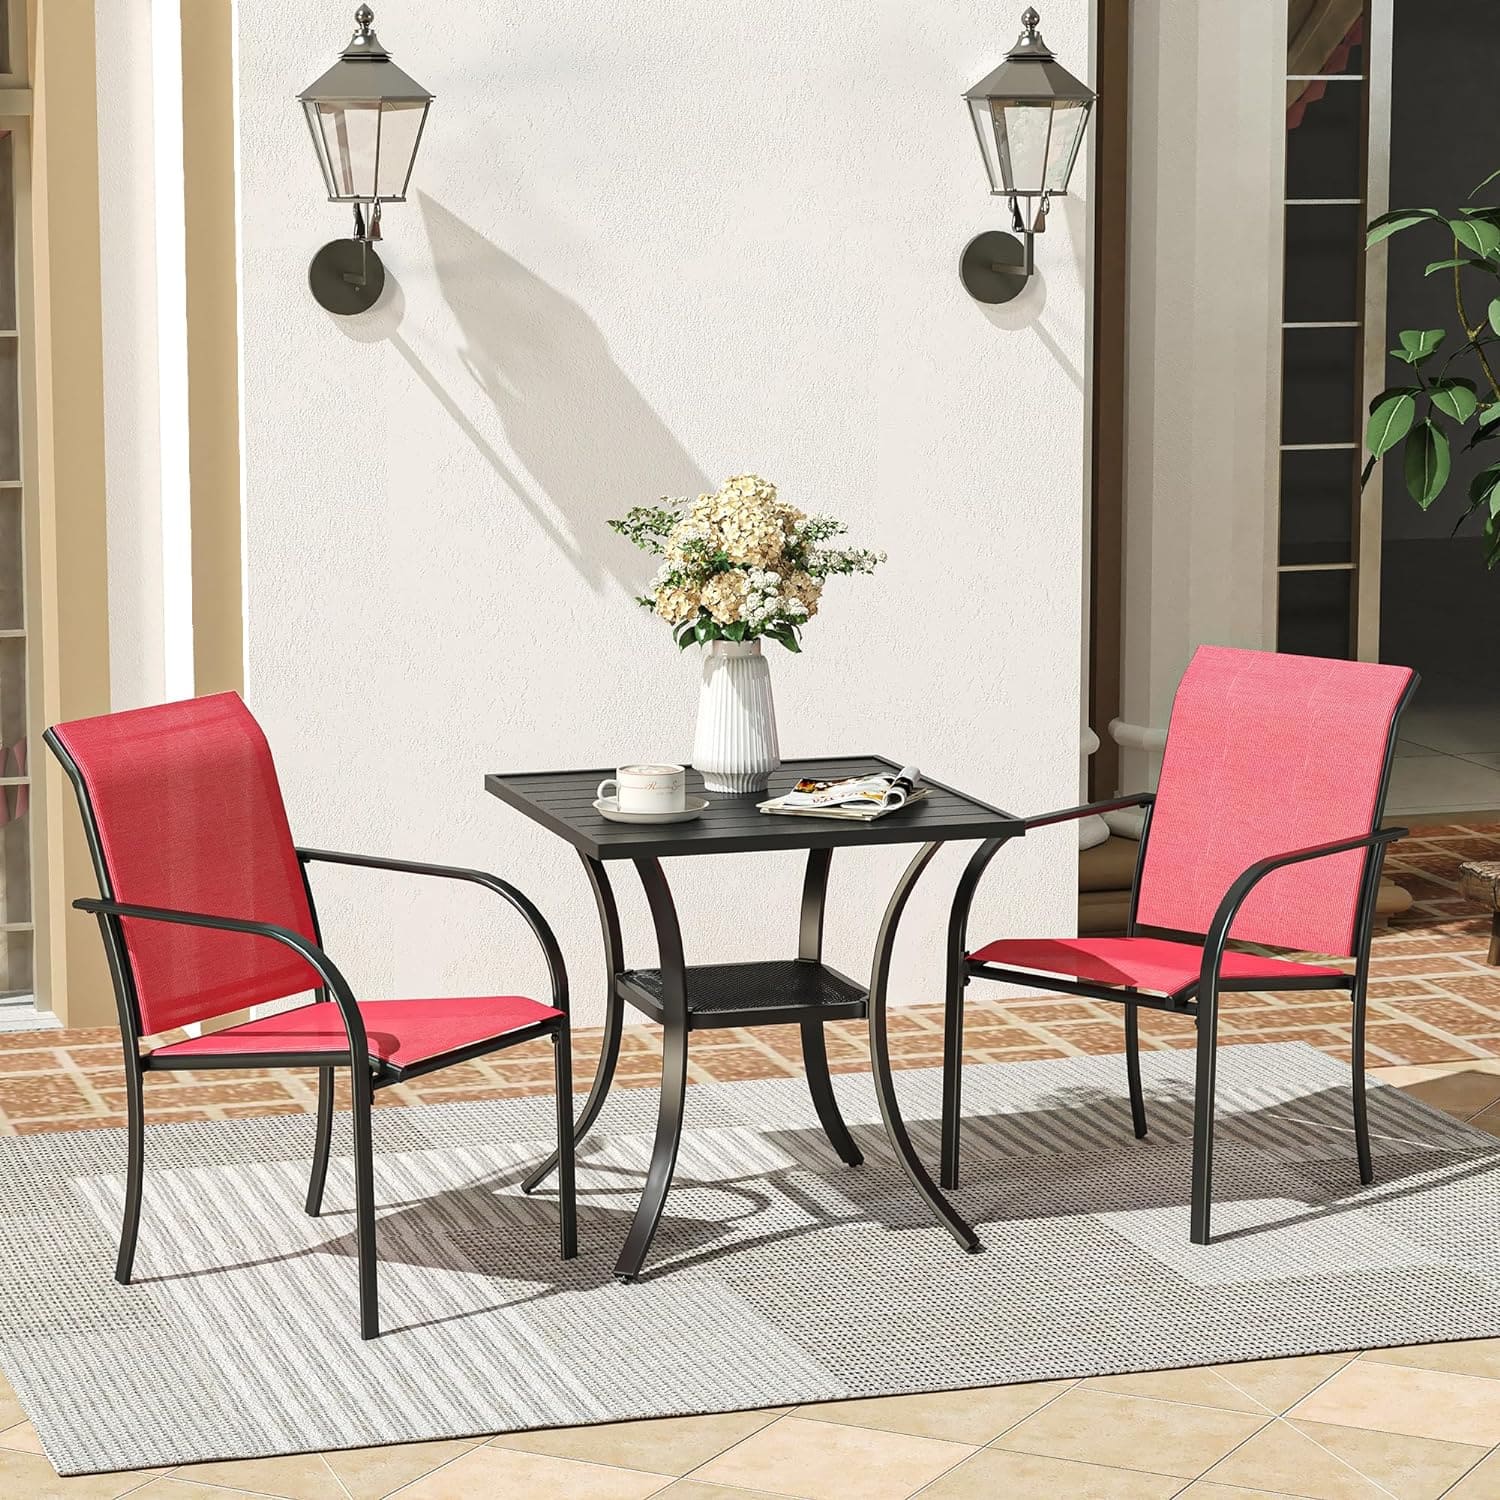 Vicllax 3-Piece Patio Bistro Set, Outdoor Stackable Sling Chairs and Square Bisto Table